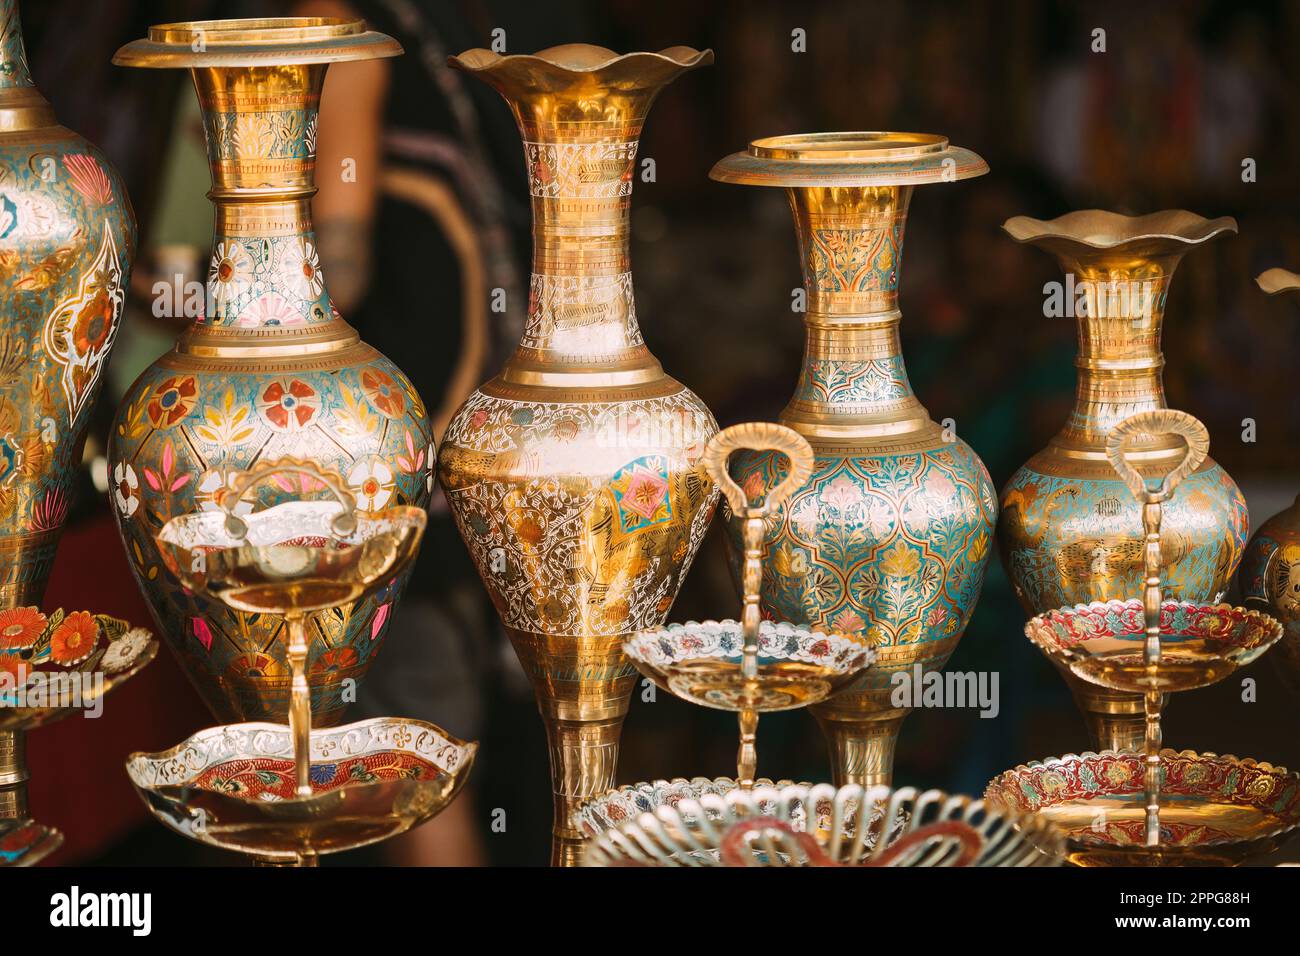 Goa, India. Indian Eastern Jugs On Local Goa Market. Popular Souvenirs From India. Market Of Antiques Old Retro Vintage Things Stock Photo